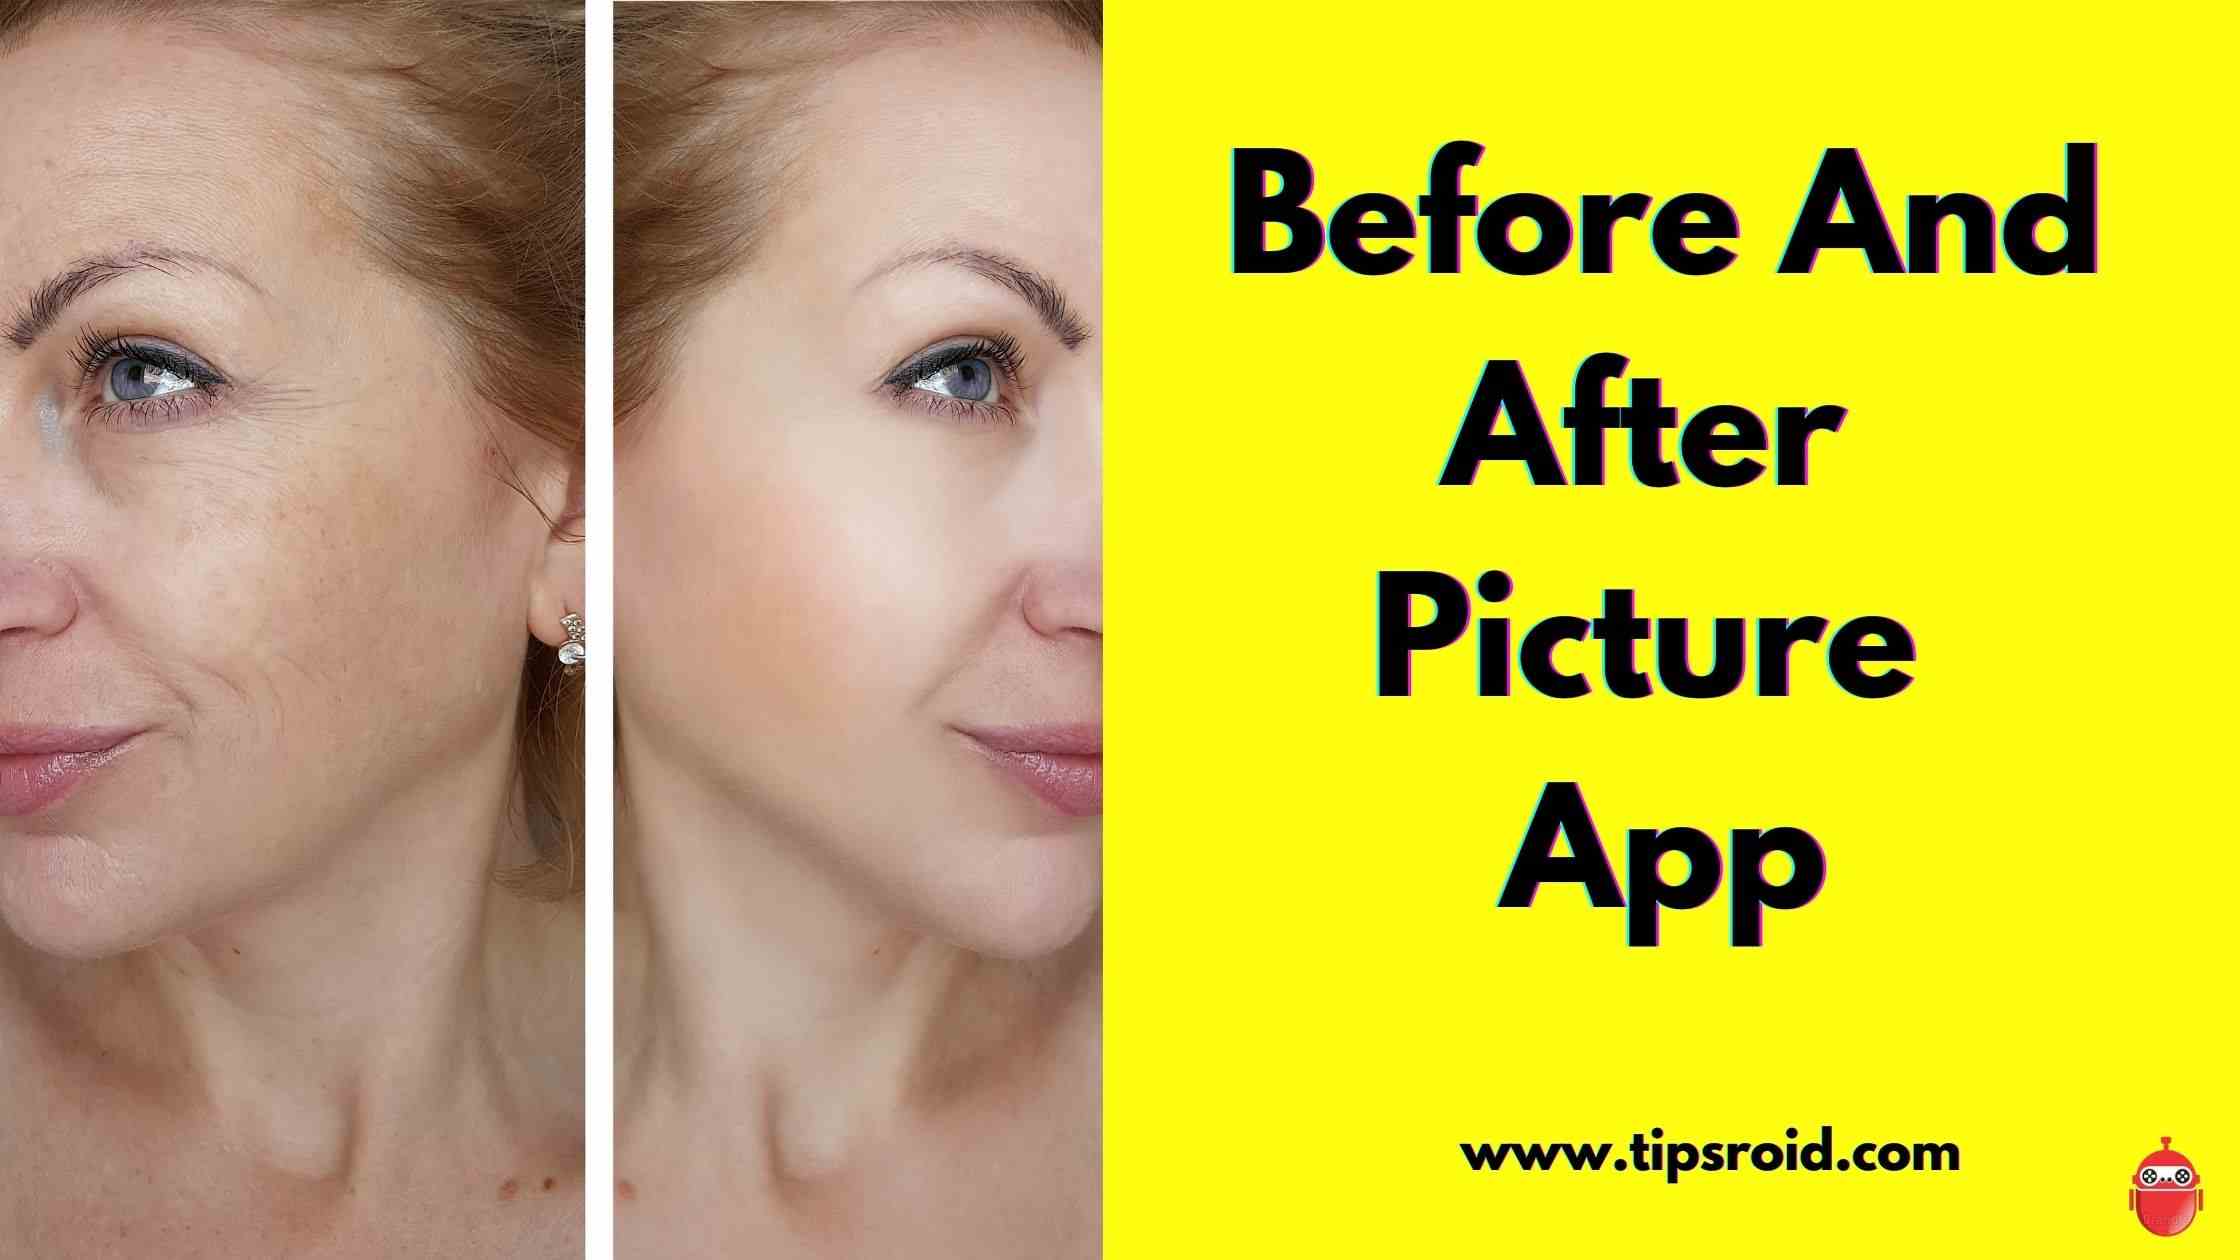 Before And After Picture App